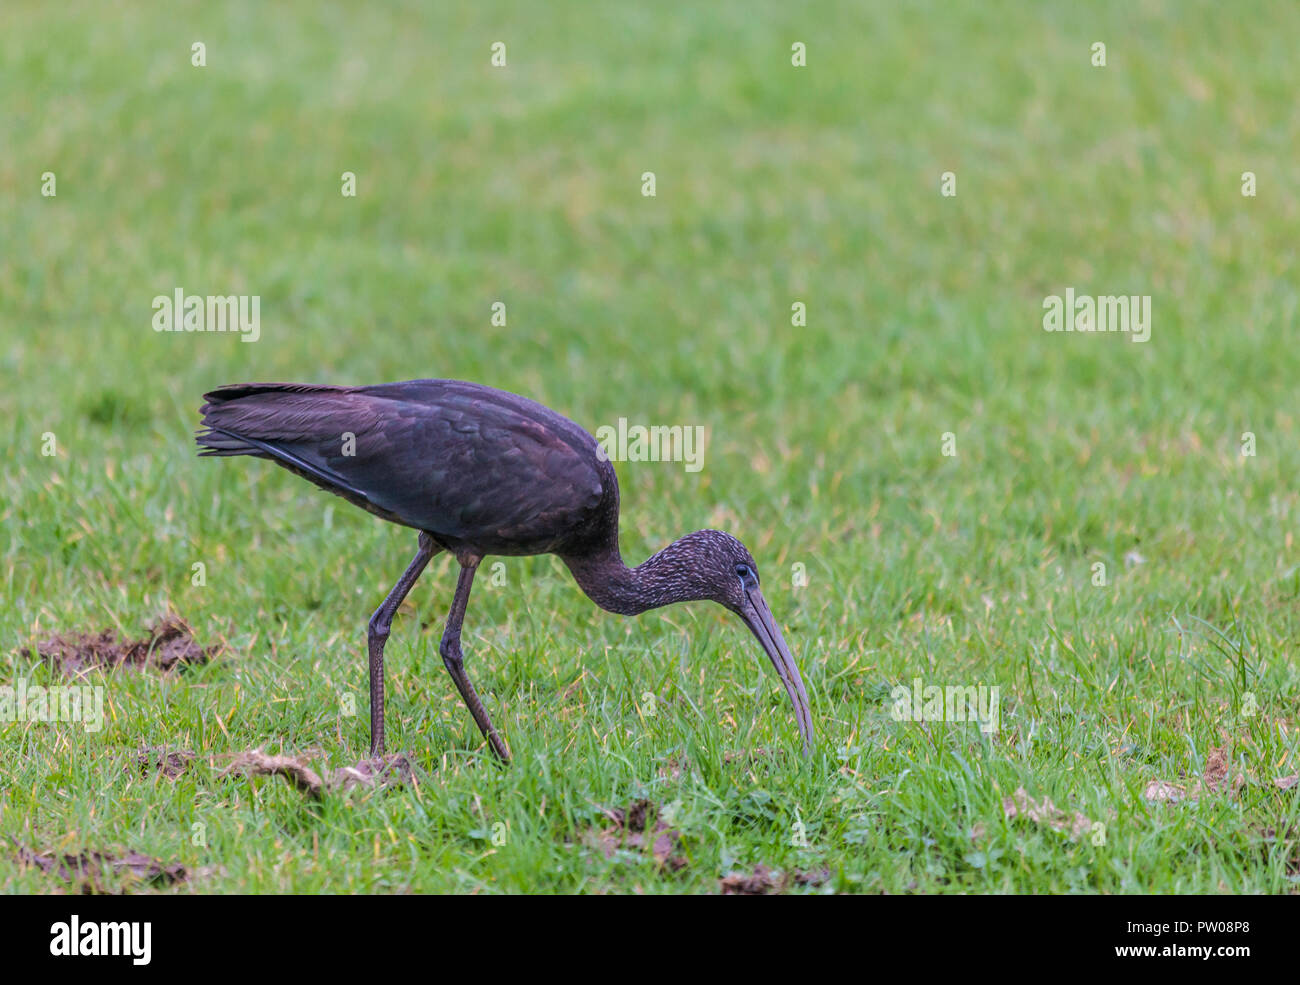 A Glossy Ibis, Plegadis falcinellus, probing for food among grass in North Ayrshire, Scotland, UK, where this species is a rare bird. Stock Photo